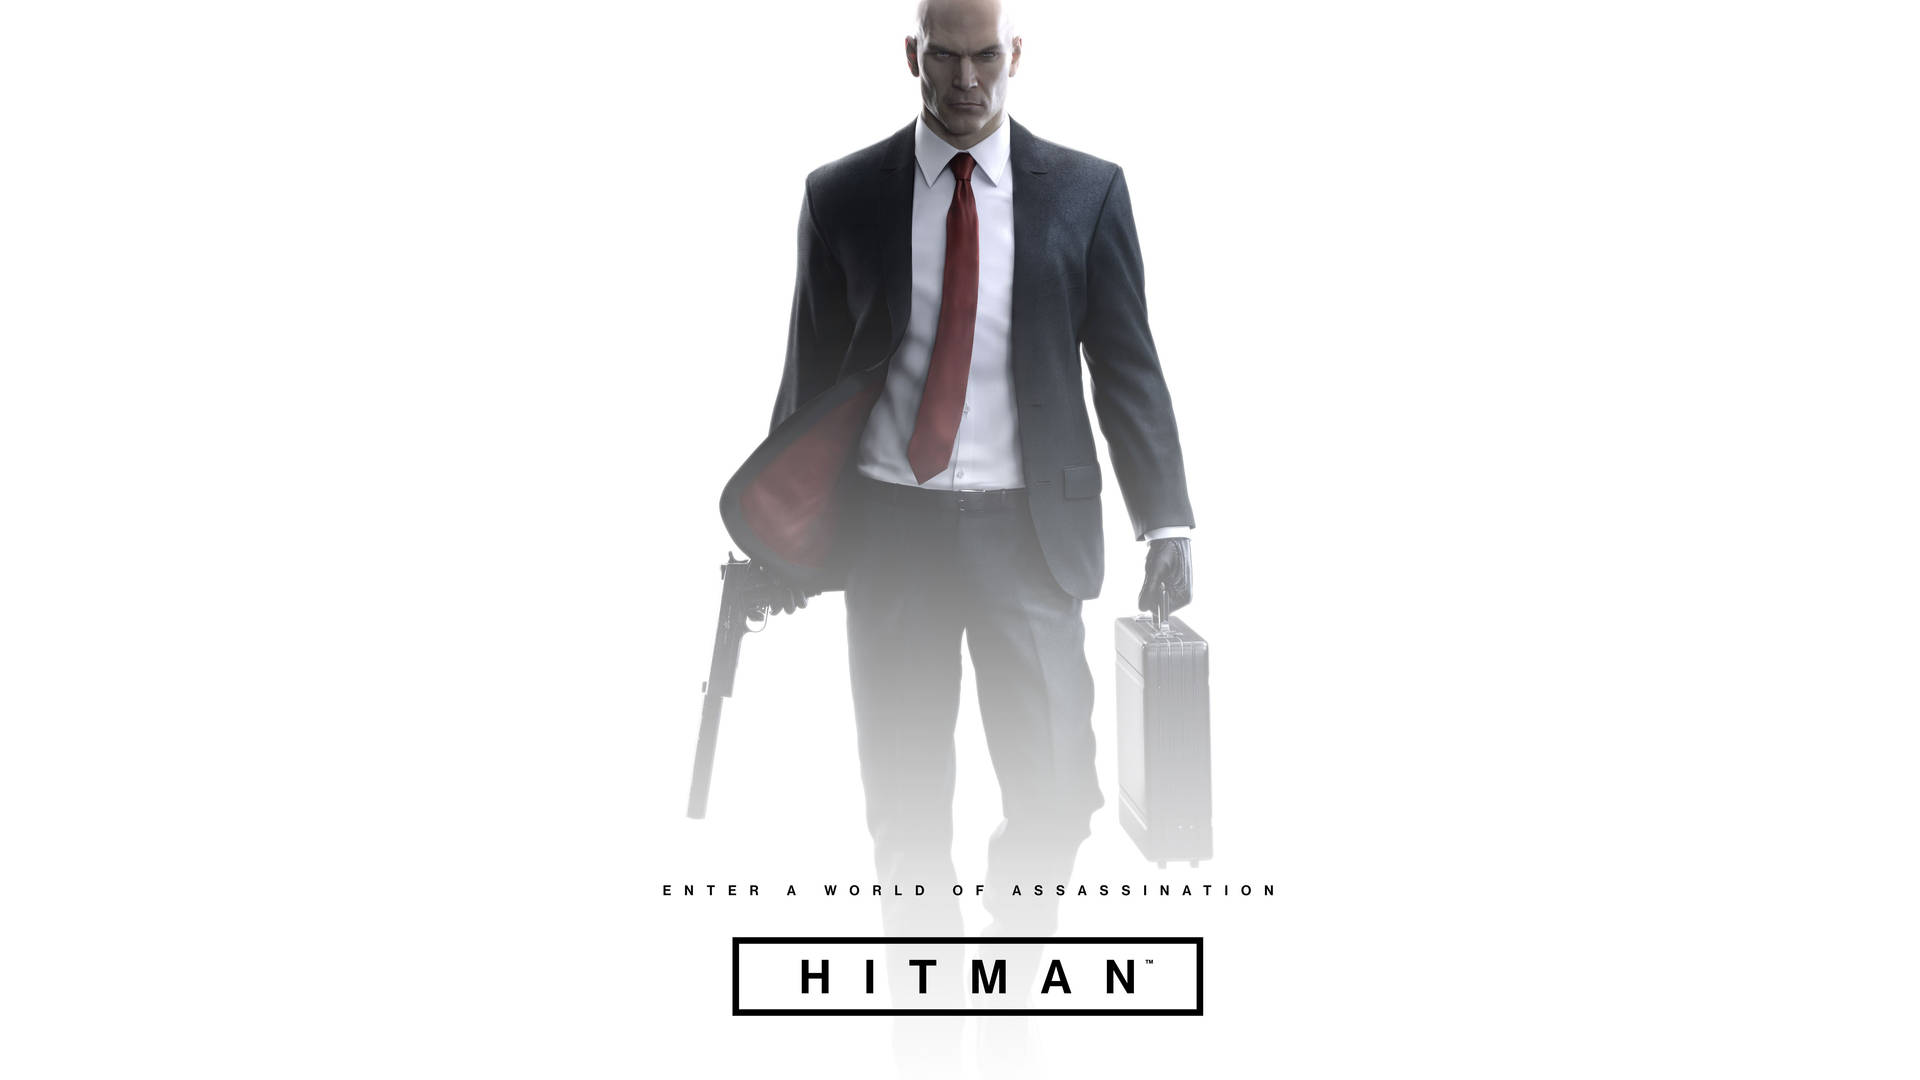 Iconic Image of Agent 47 from Hitman HD 2016 Poster Wallpaper